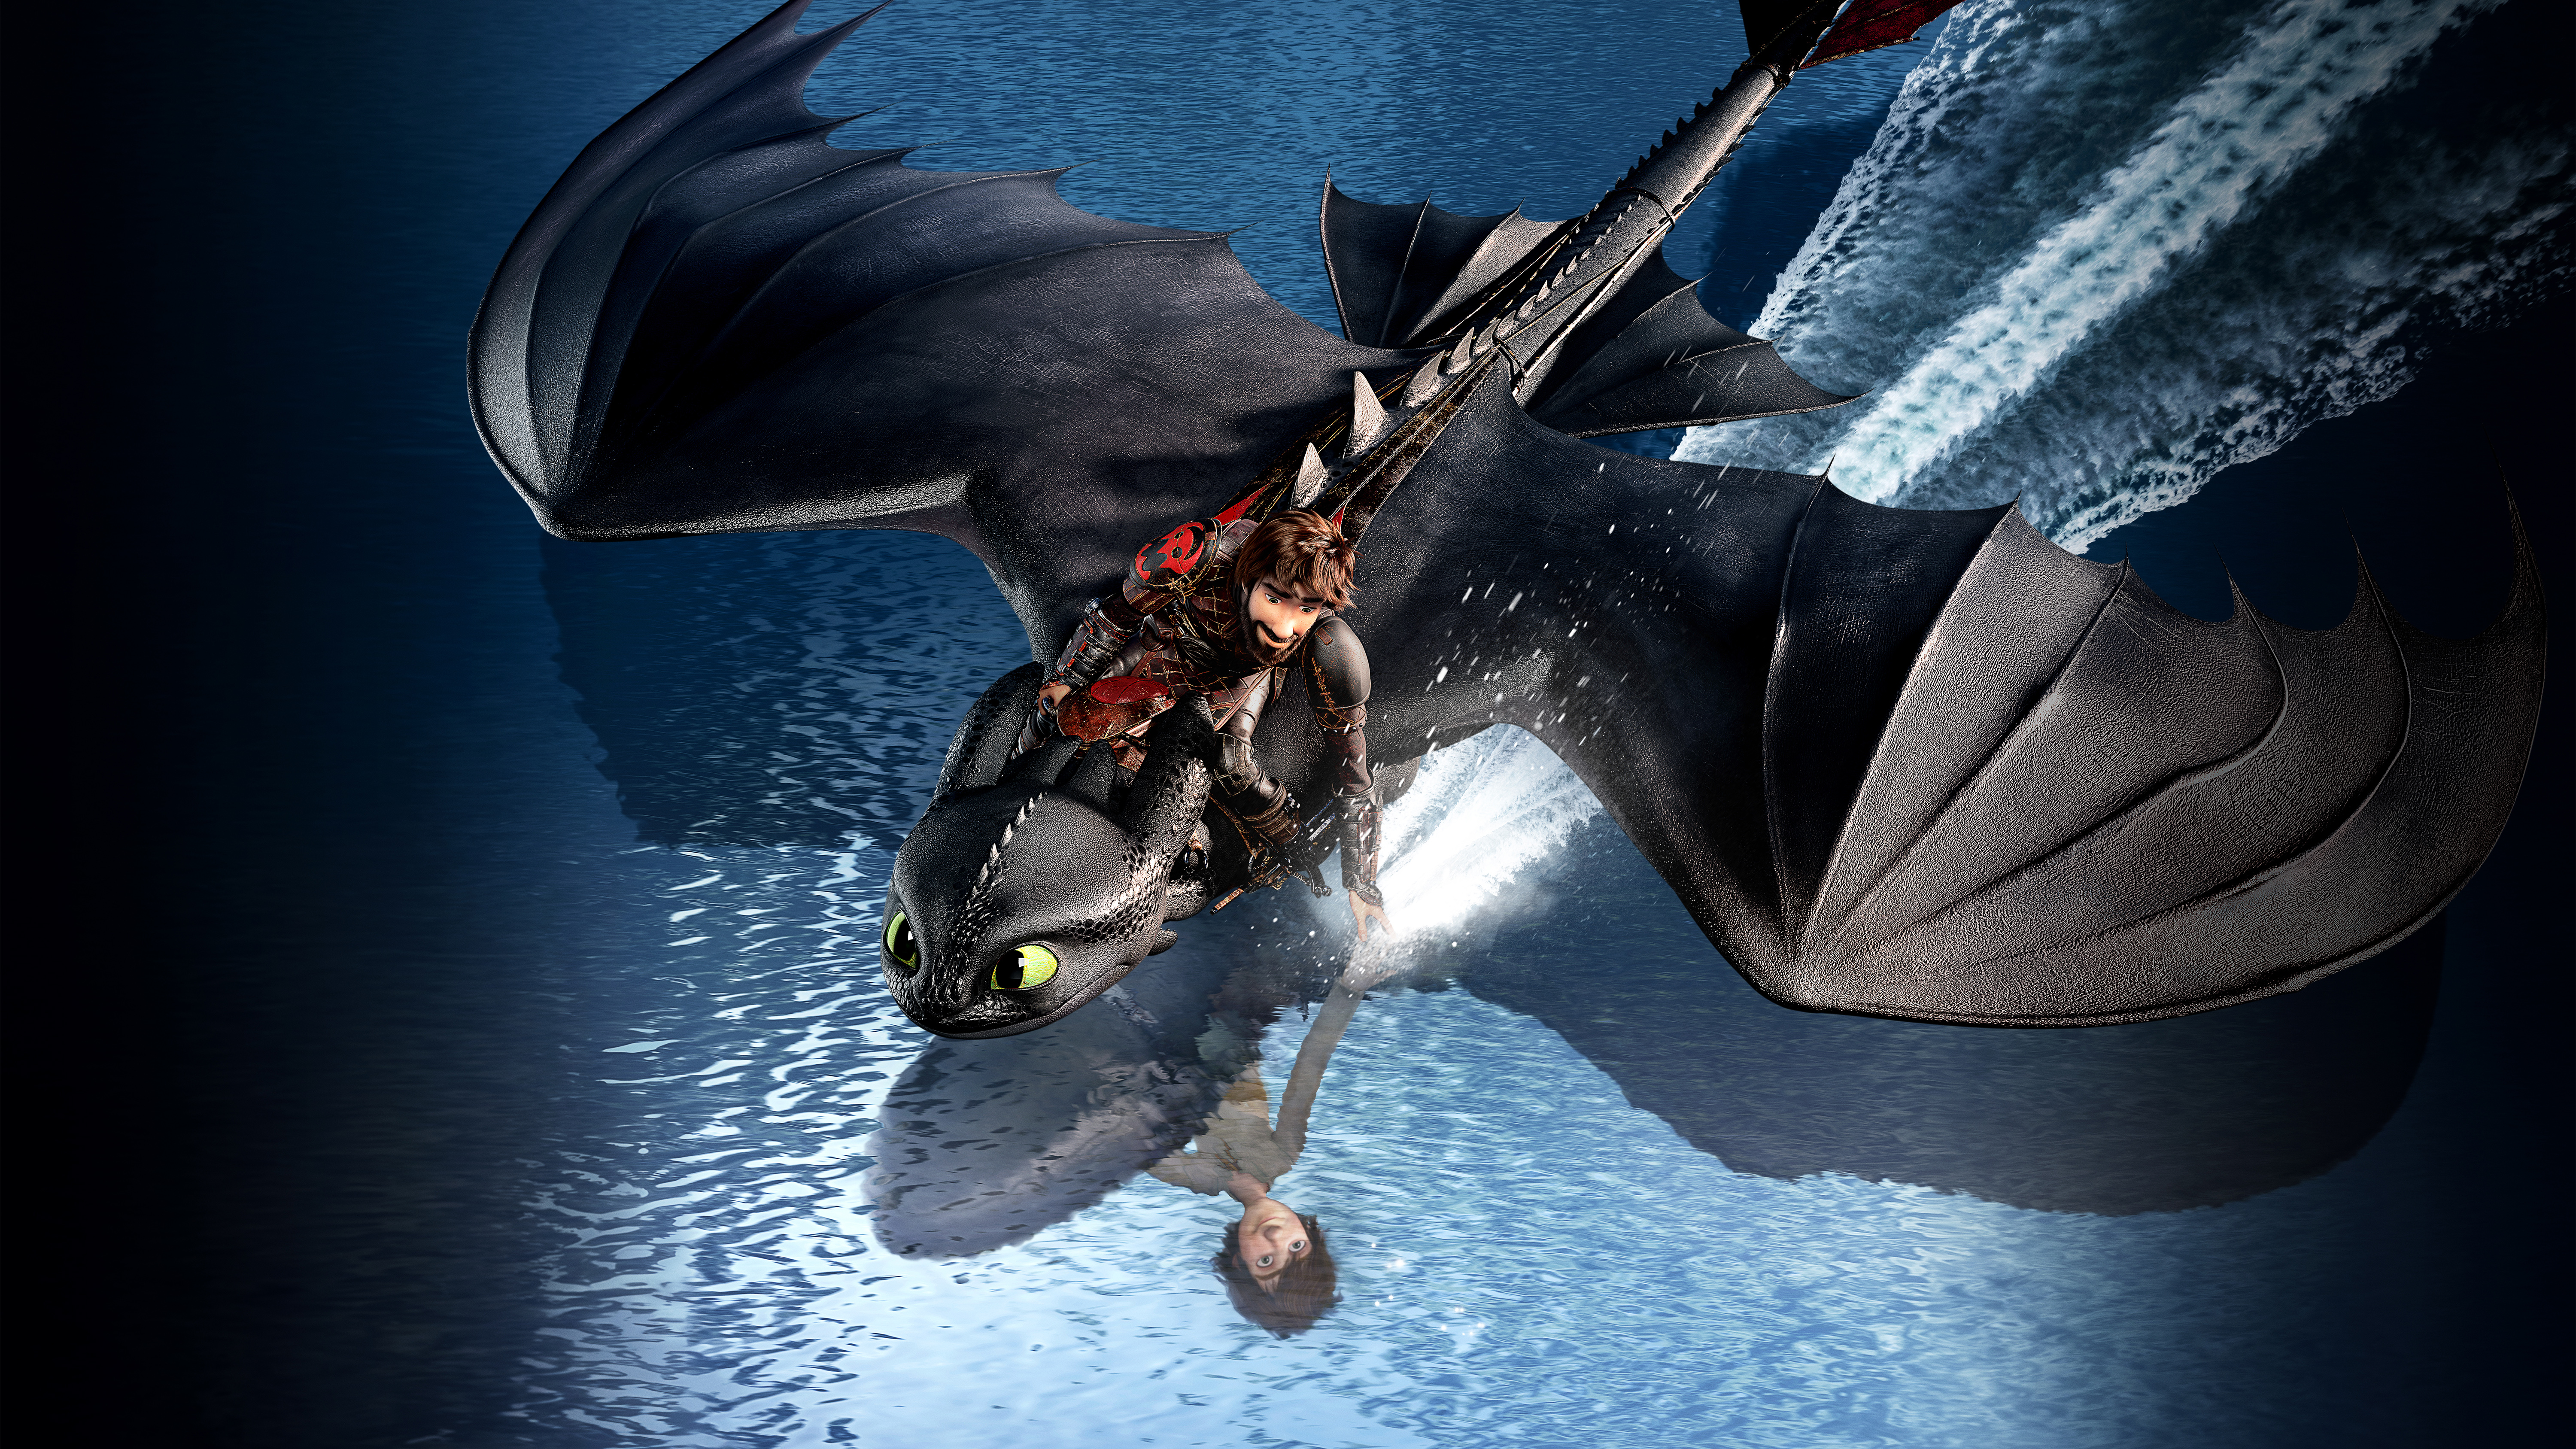 How To Train Your Dragon 3 The Hidden World 2019 5k - Hidden World How To Train Your Dragon 3 - HD Wallpaper 